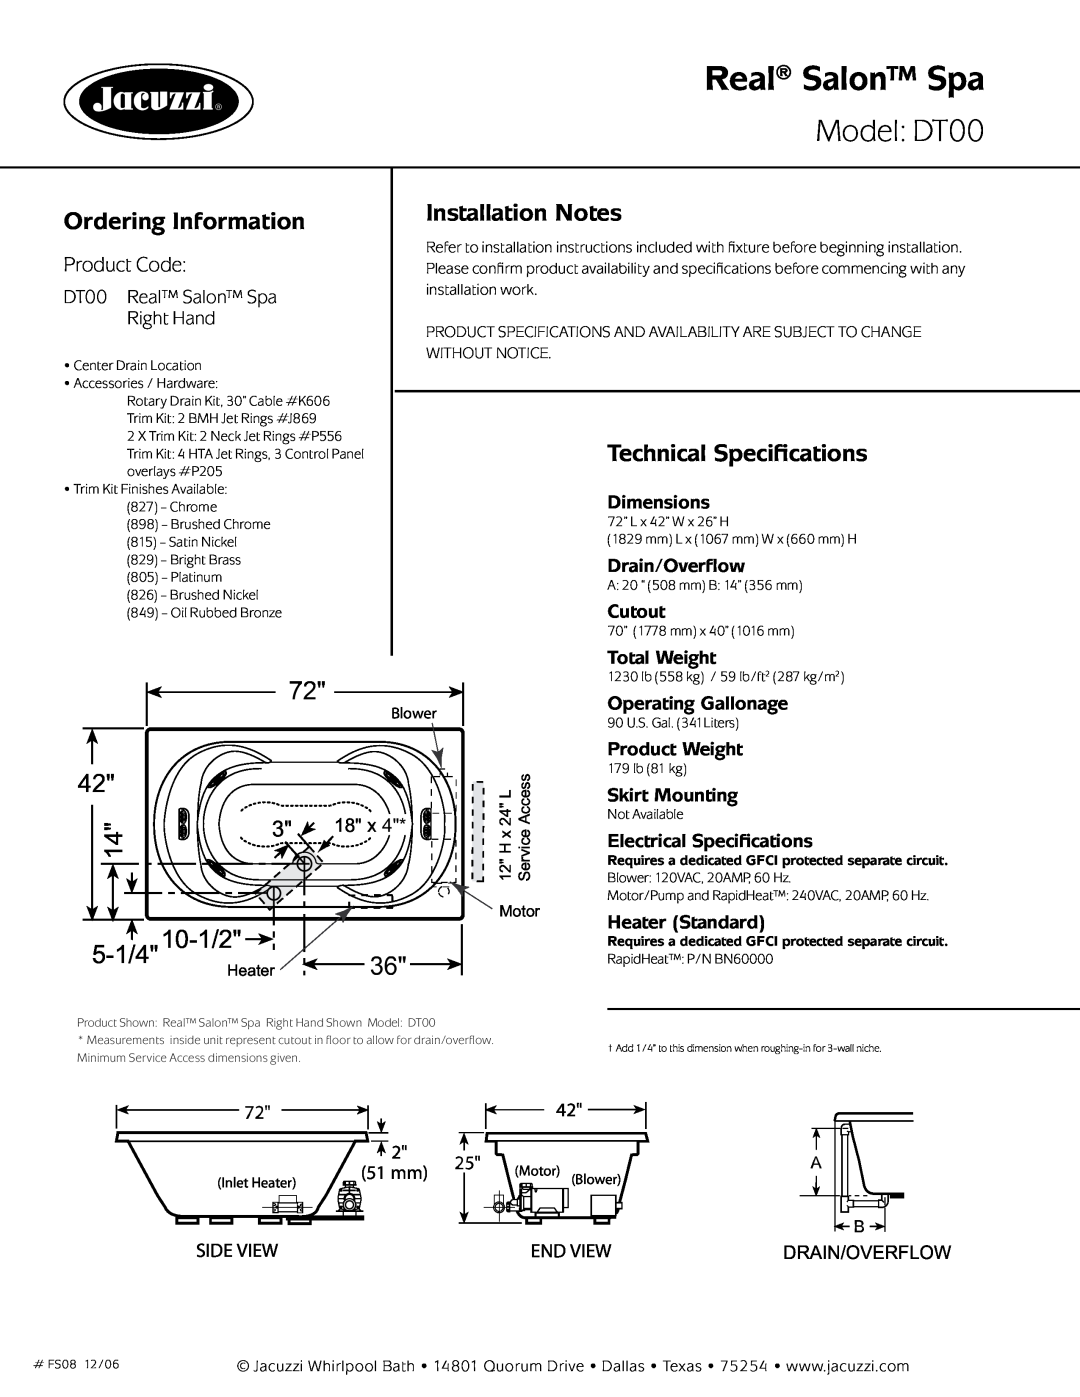 Jacuzzi Real Salon Spa, Model DT00, Ordering Information, Installation Notes, Technical Specifications, 5-1/4 10-1/2 